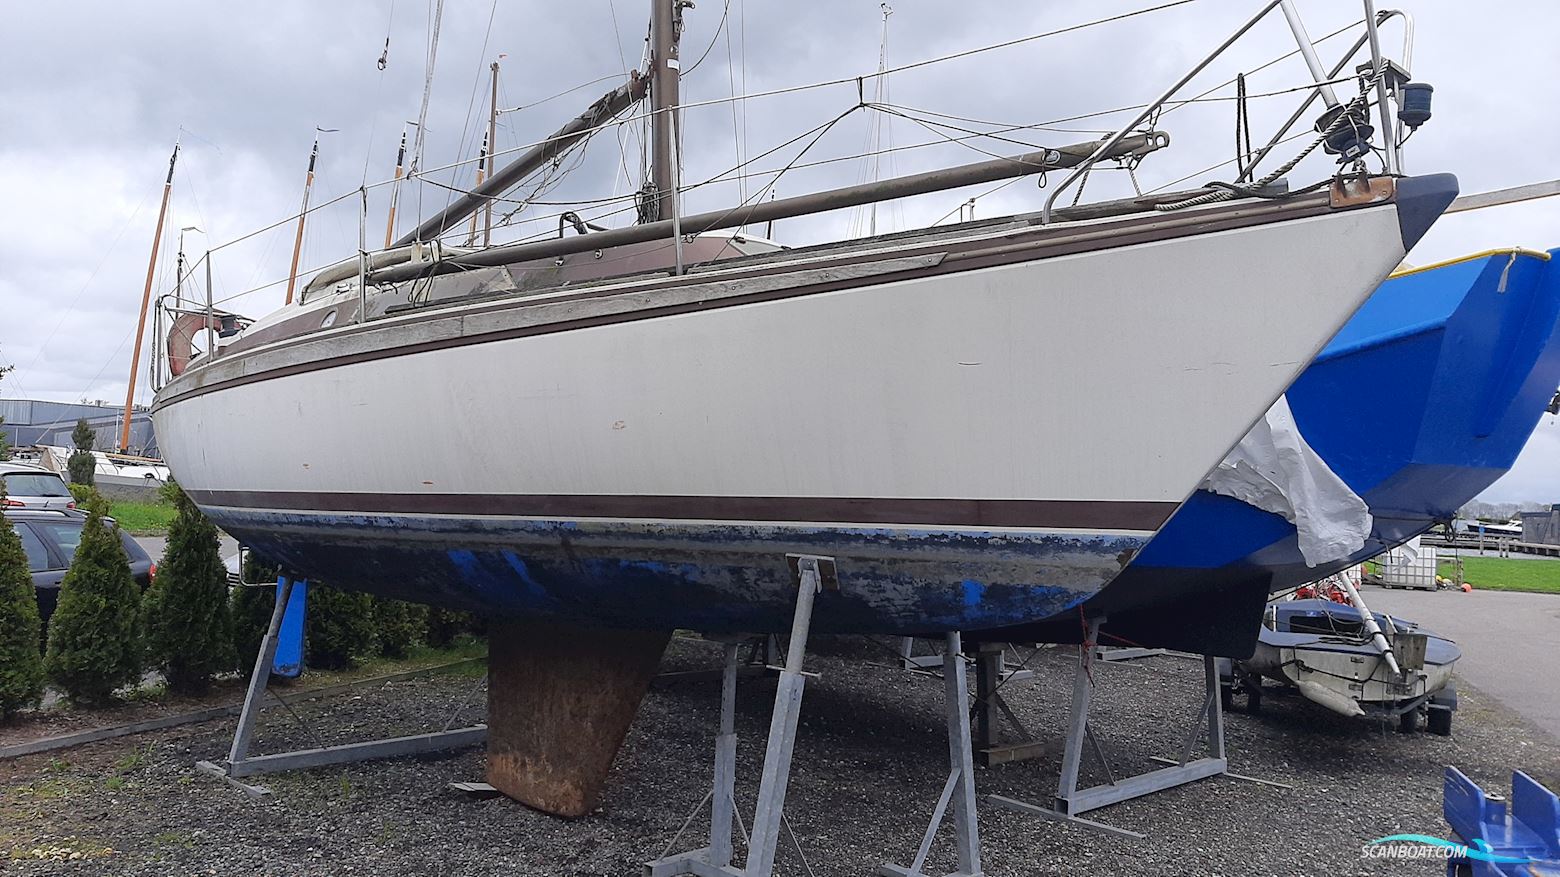 Dehler Duetta Boat type not specified 1982, with Yanmar engine, The Netherlands